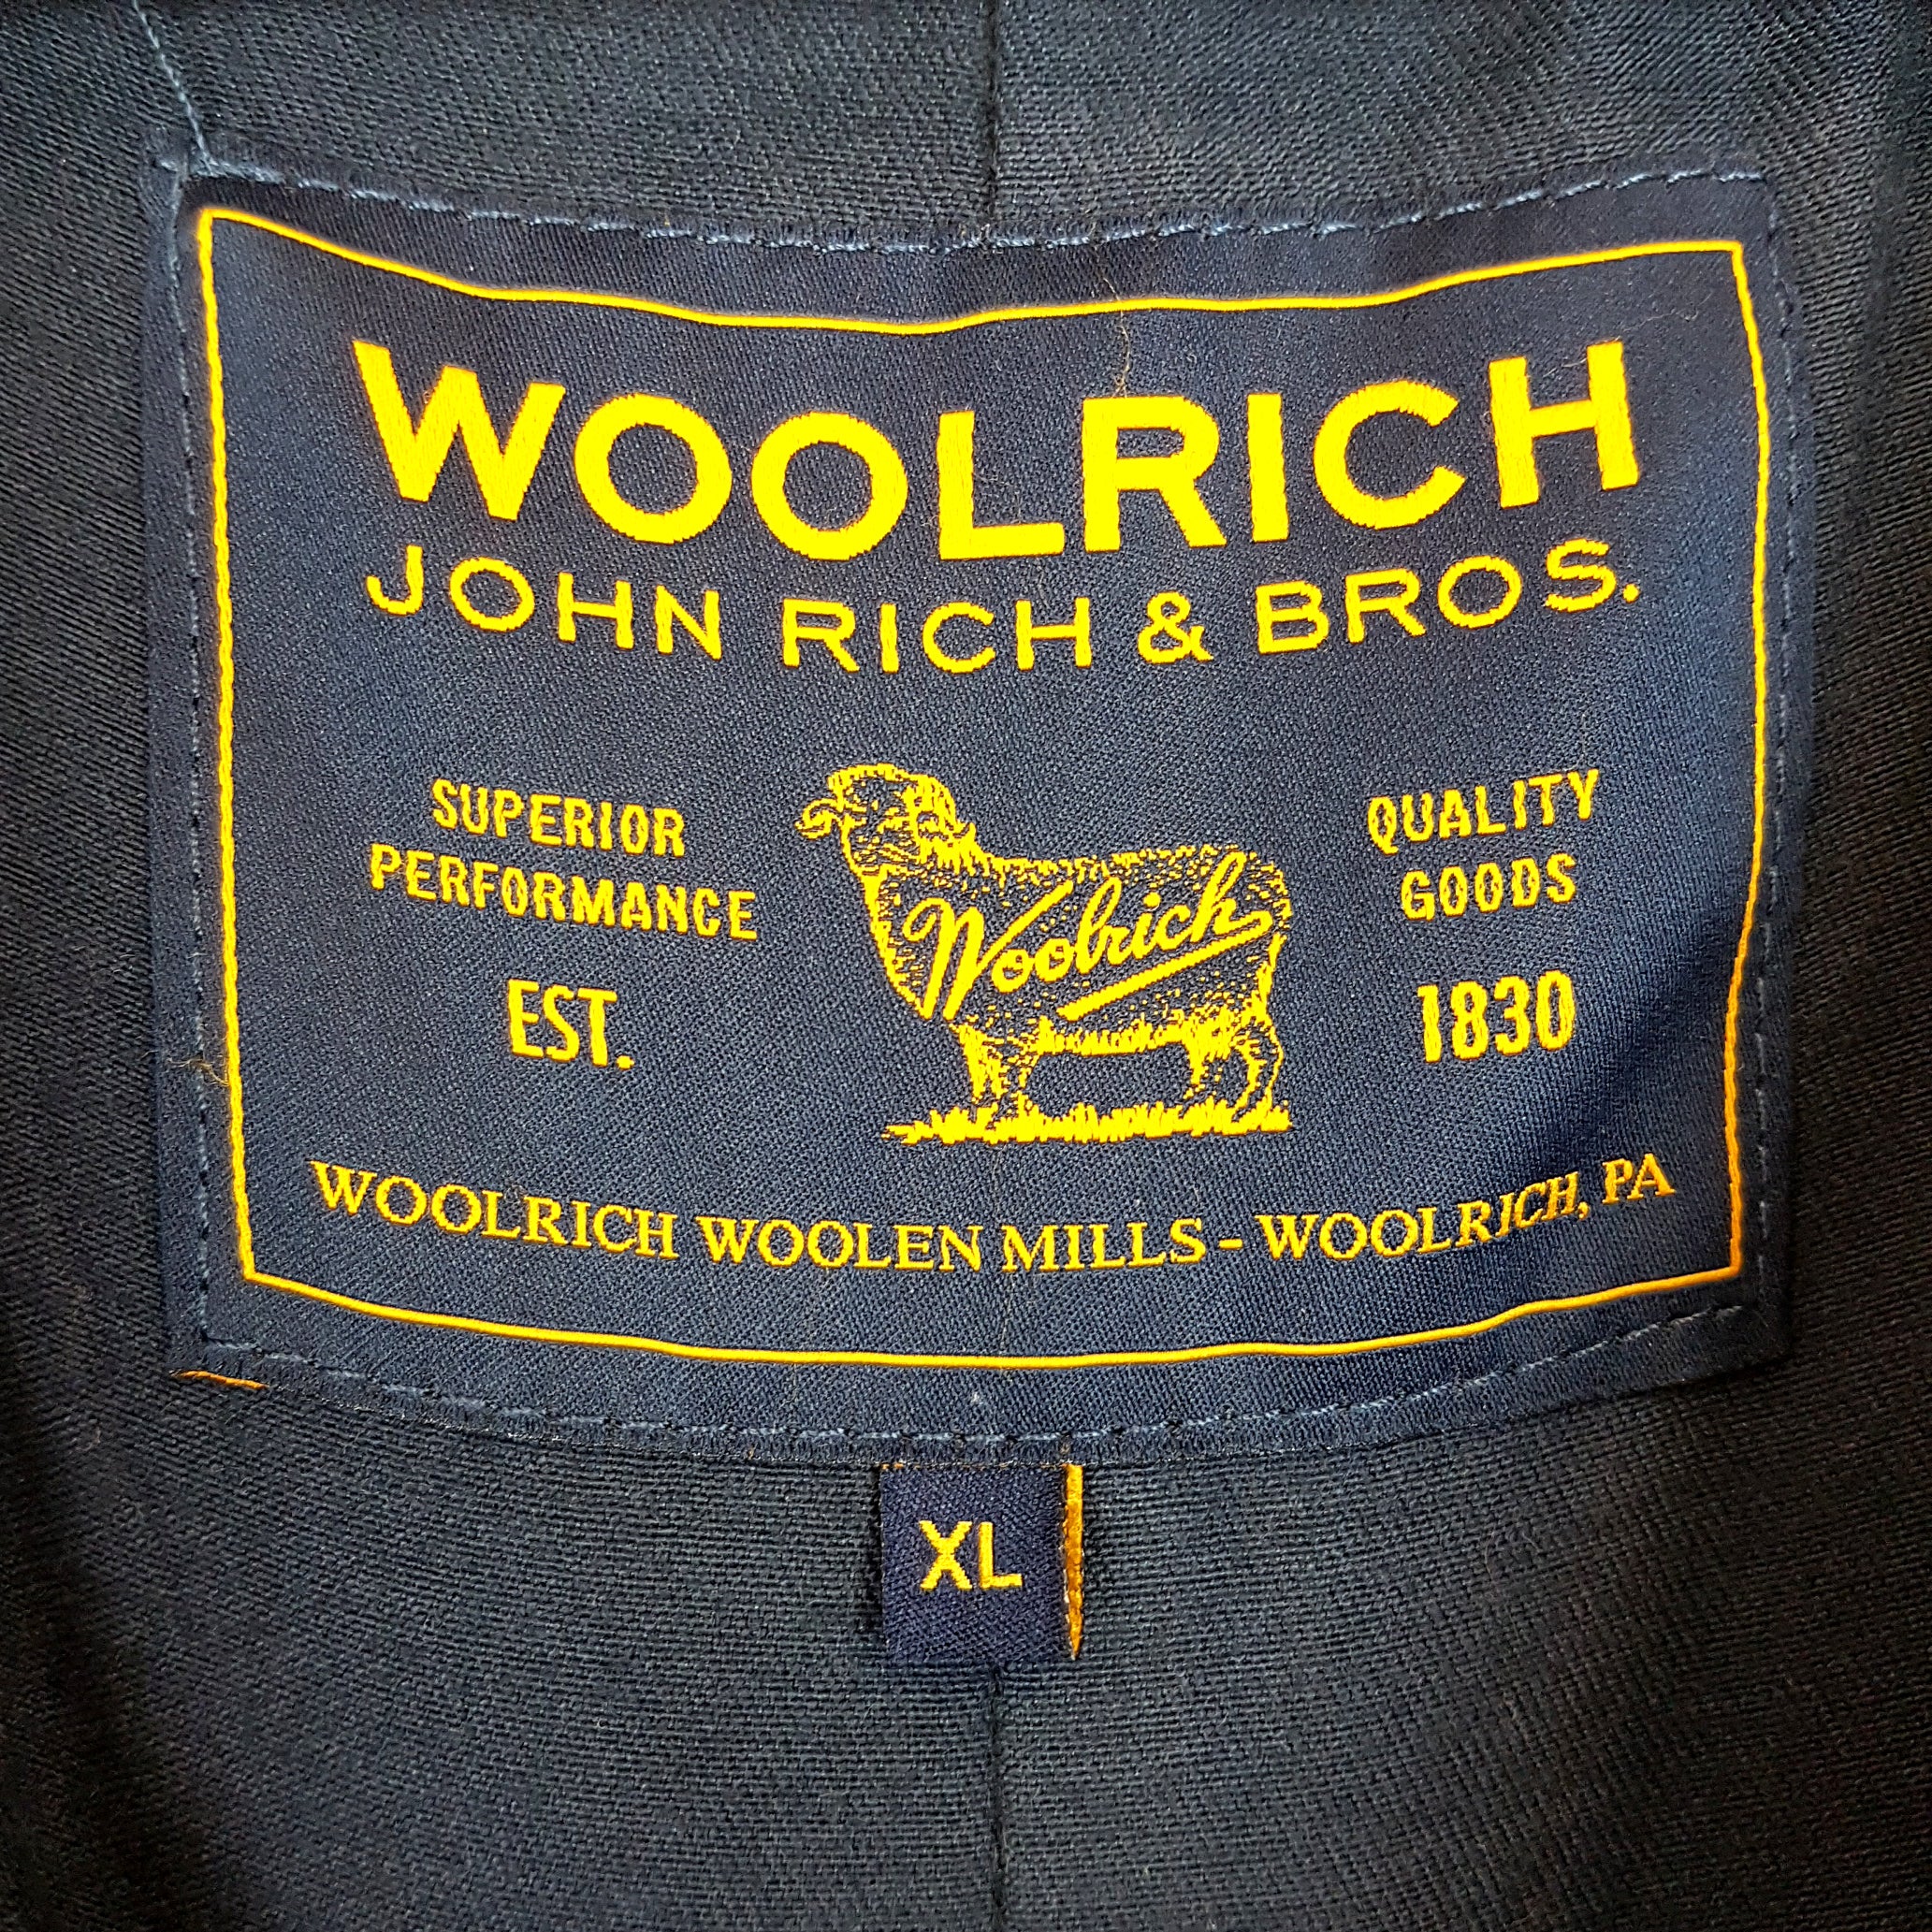 Woolrich Leather Trench Coat